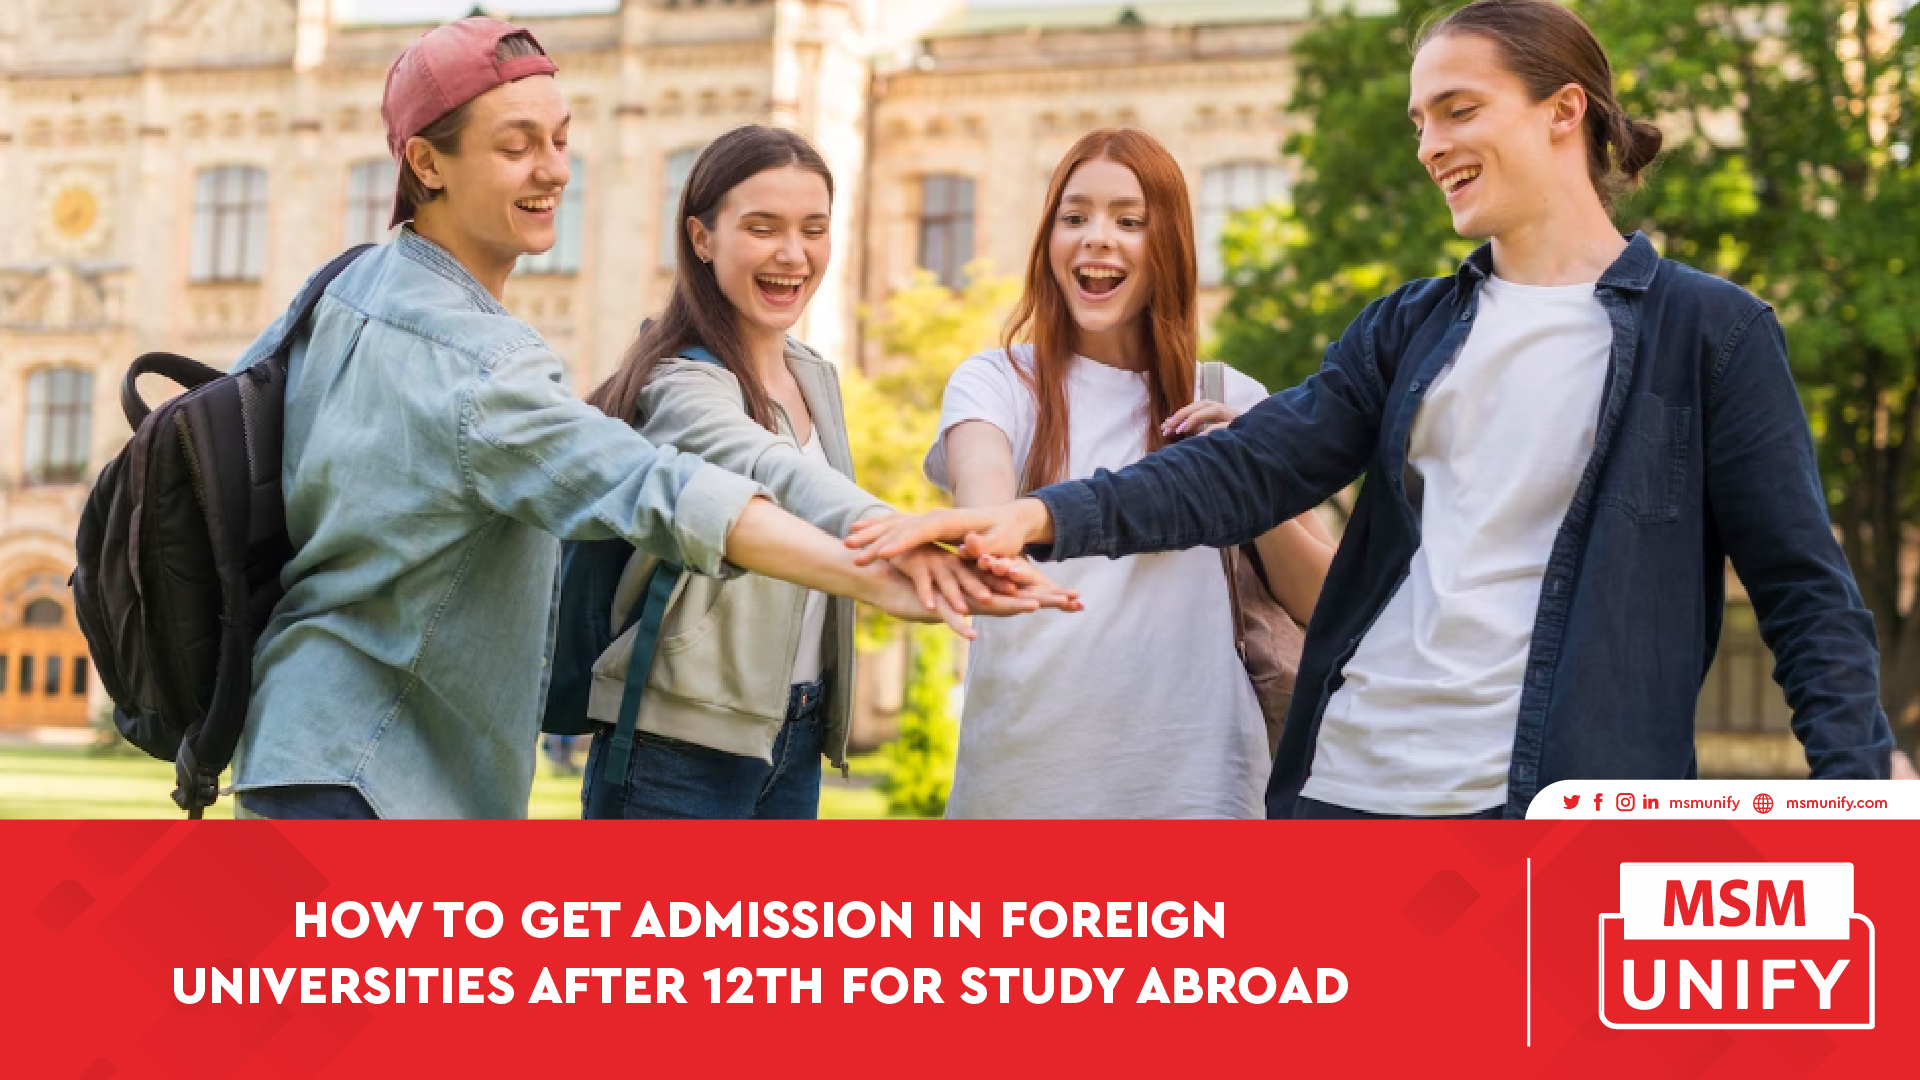 How to Get Admission in Foreign Universities after 12th for abroad study